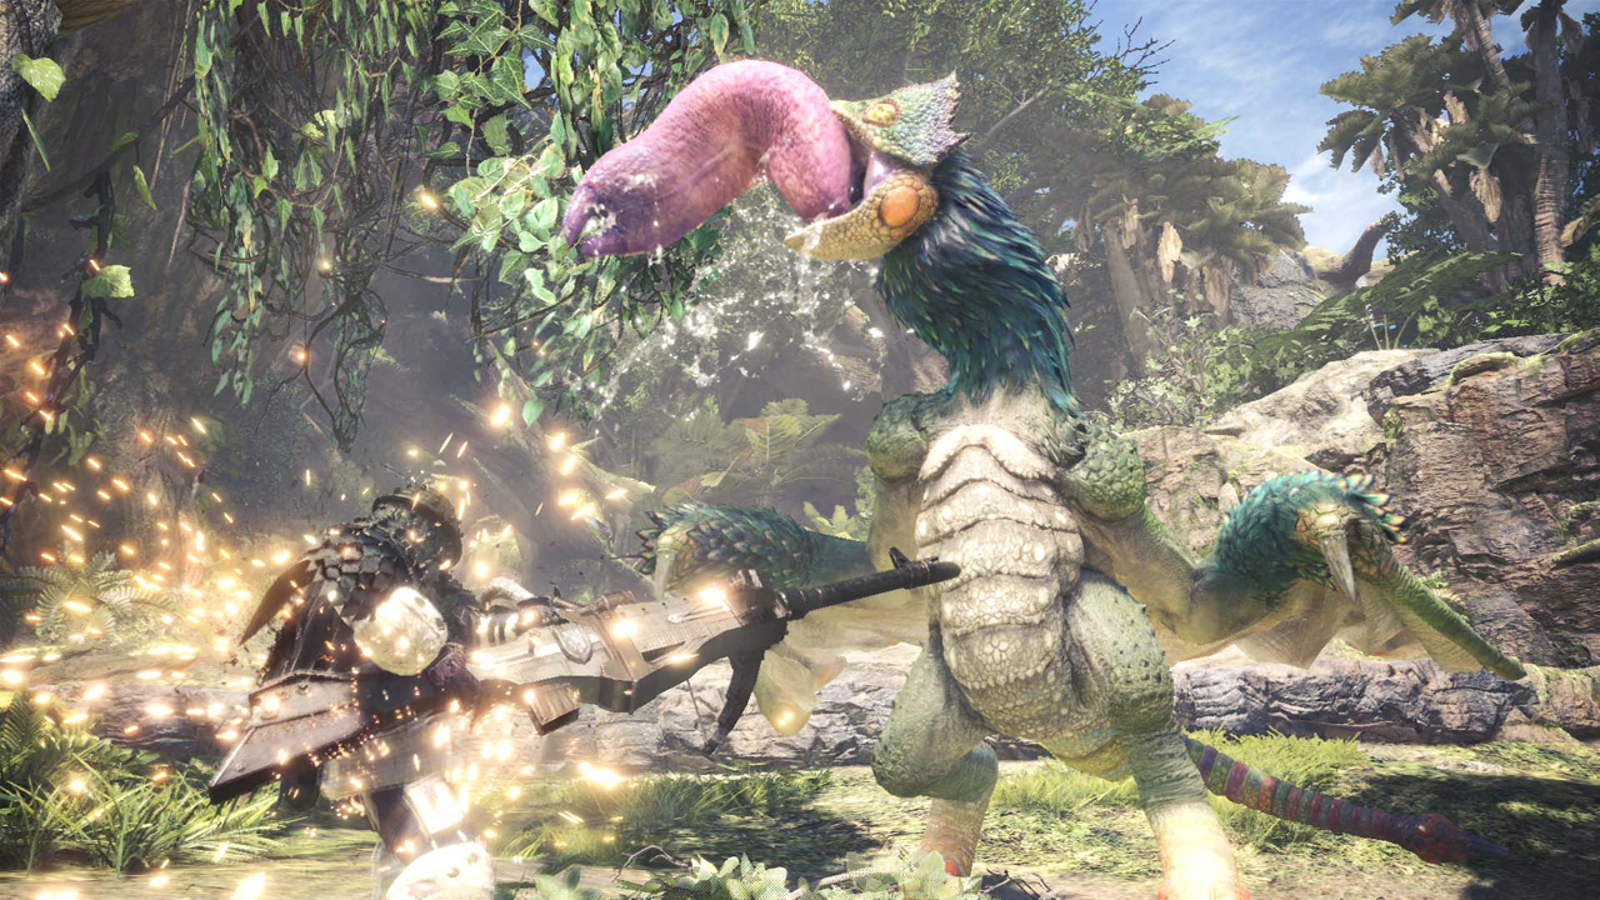 Monster Hunter: World Review: Track Down Unique and Dangerous Monsters